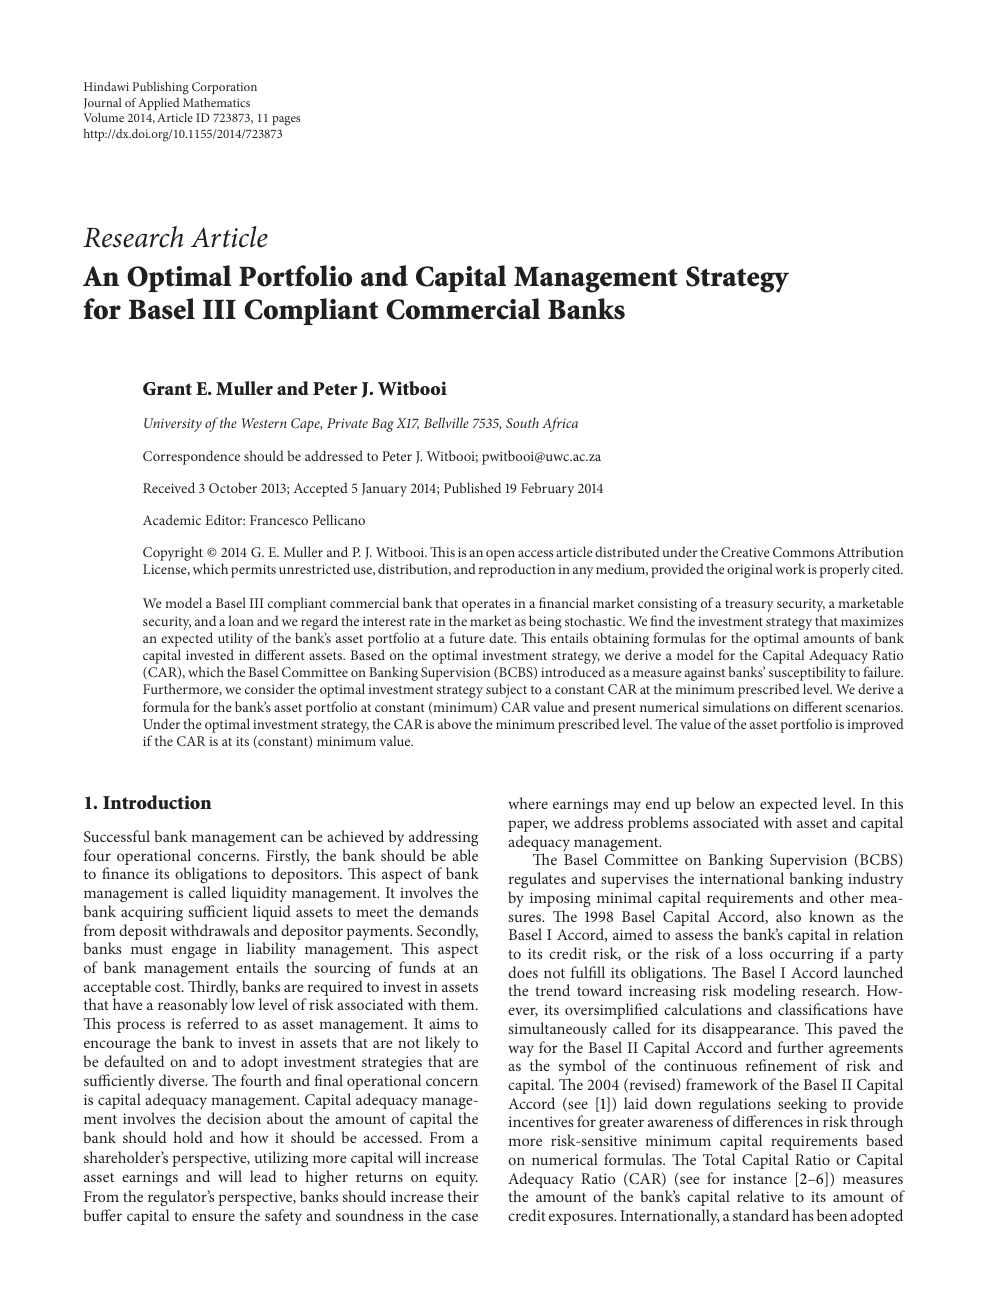 An Optimal Portfolio And Capital Management Strategy For Basel Iii Compliant Commercial Banks Topic Of Research Paper In Mathematics Download Scholarly Article Pdf And Read For Free On Cyberleninka Open Science